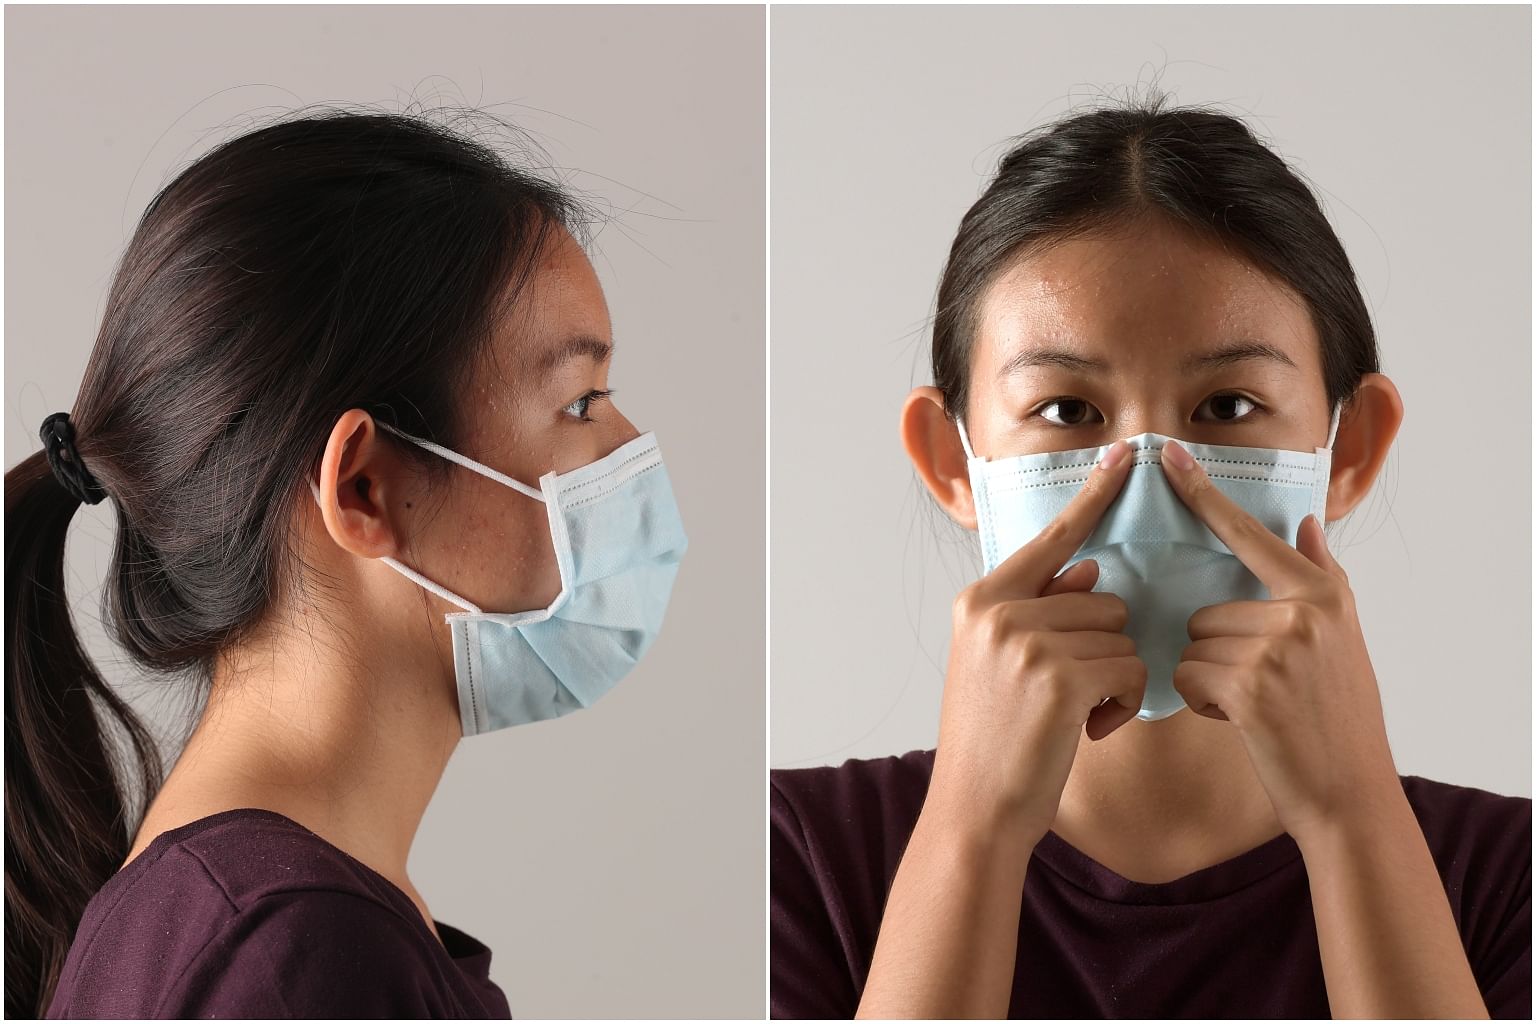 Coronavirus Who Needs To Wear A Mask And What S The Proper Way To Wear It Singapore News Top Stories The Straits Times